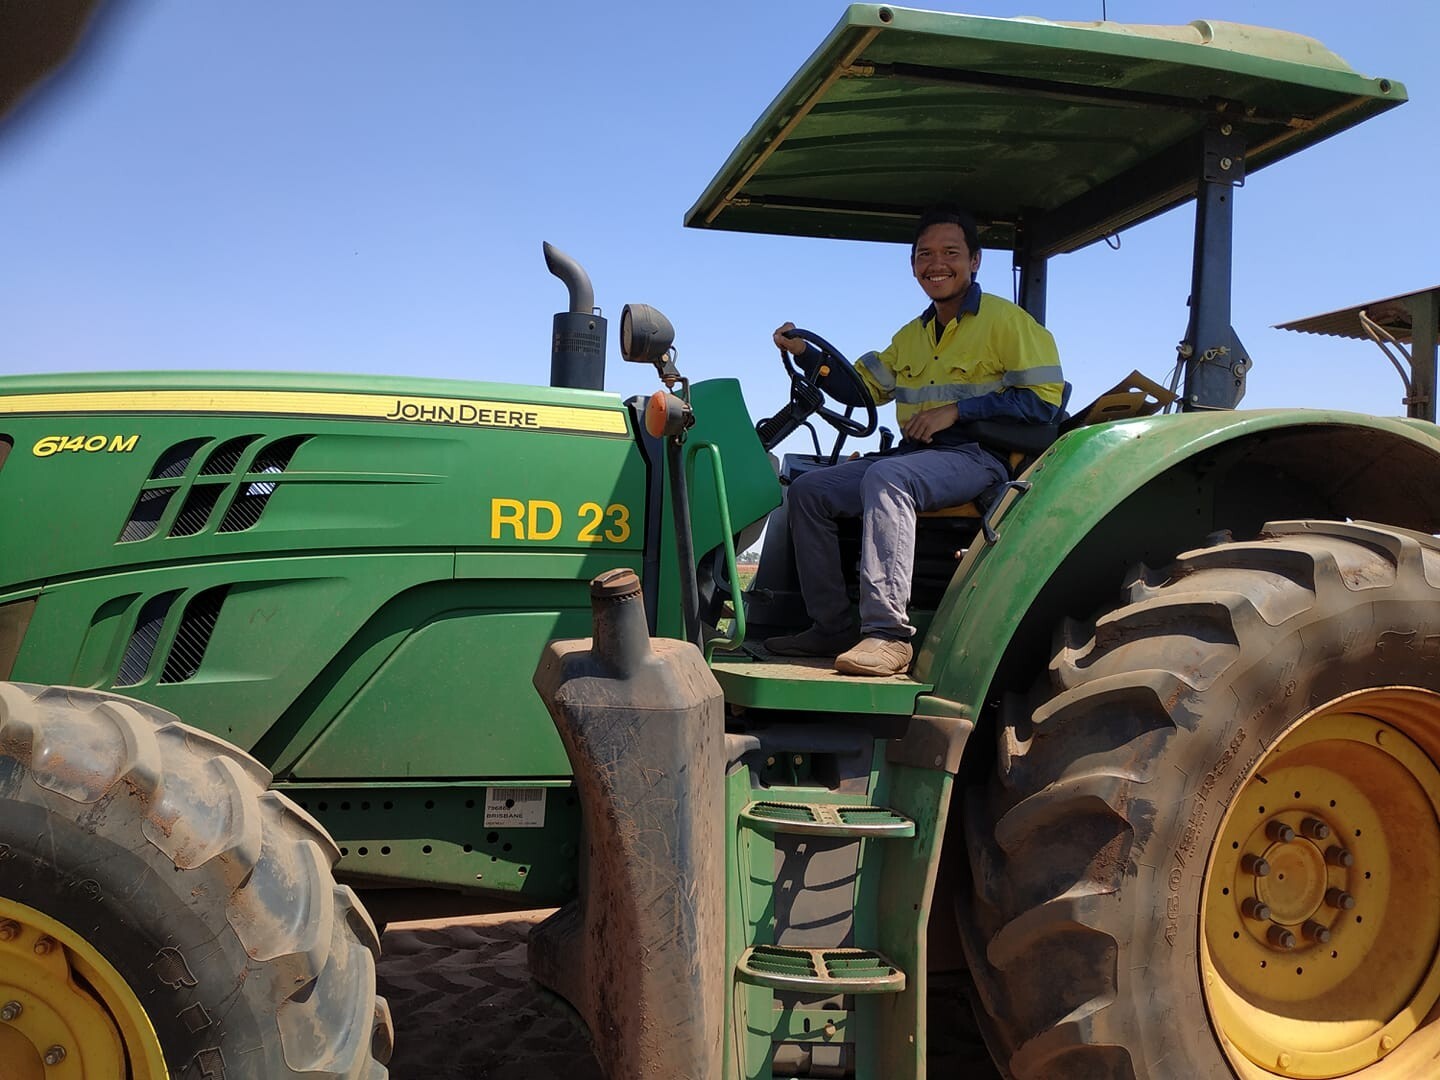 Indonesian Audi Melsom has documented his experience of working on farms in Australia on YouTube. Photo: Audi Melsom